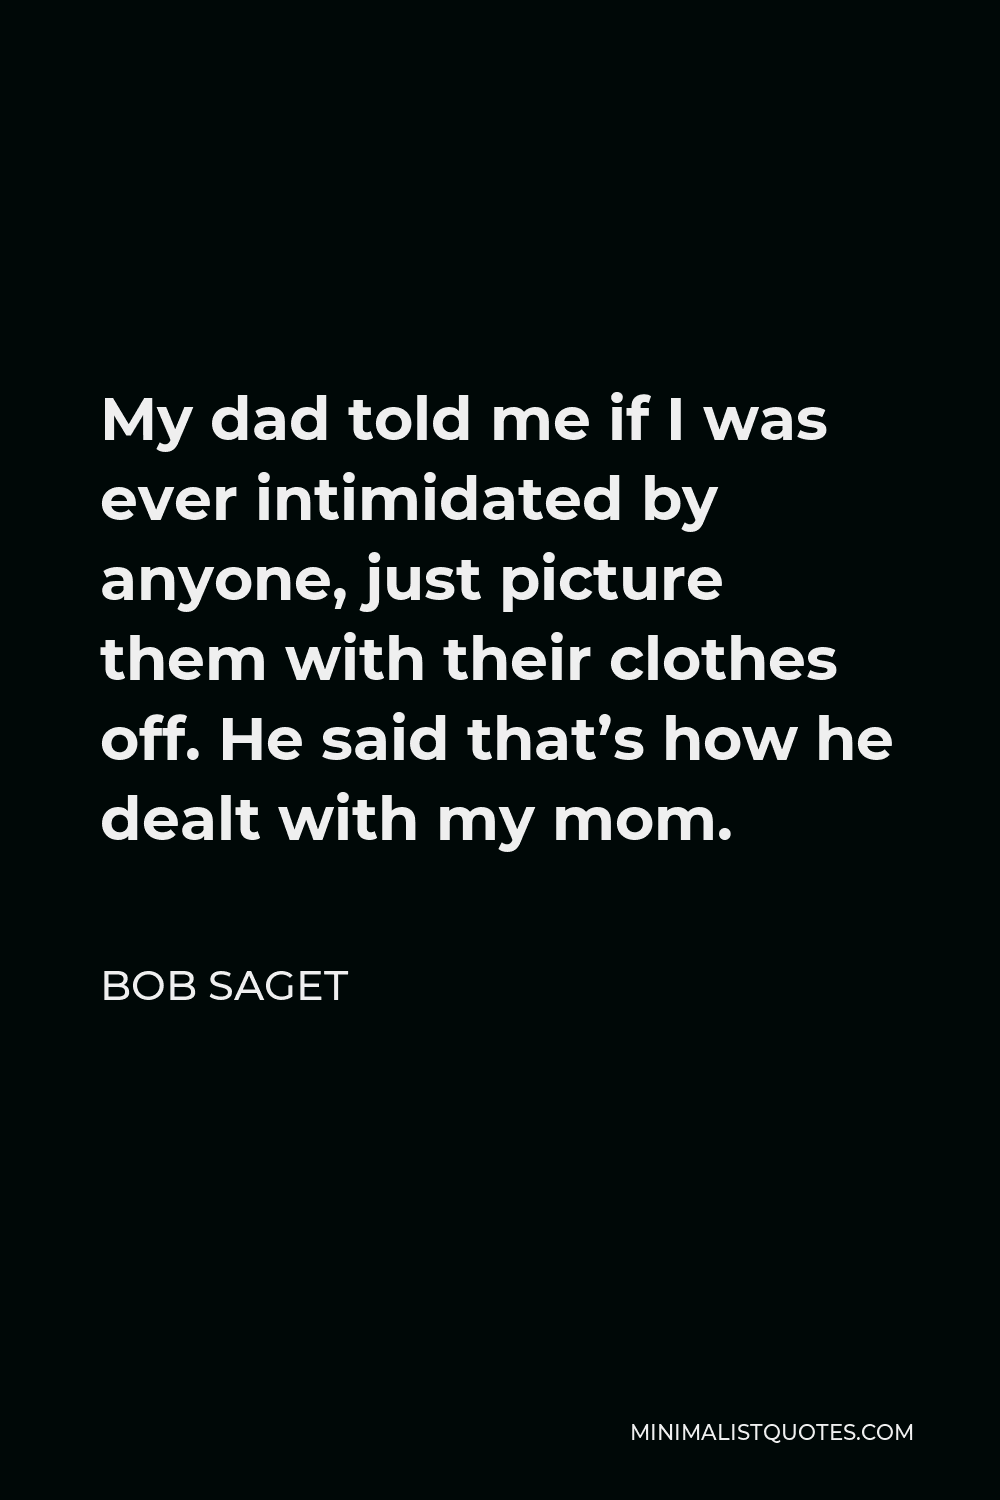 Bob Saget Quote - My dad told me if I was ever intimidated by anyone, just picture them with their clothes off. He said that’s how he dealt with my mom.